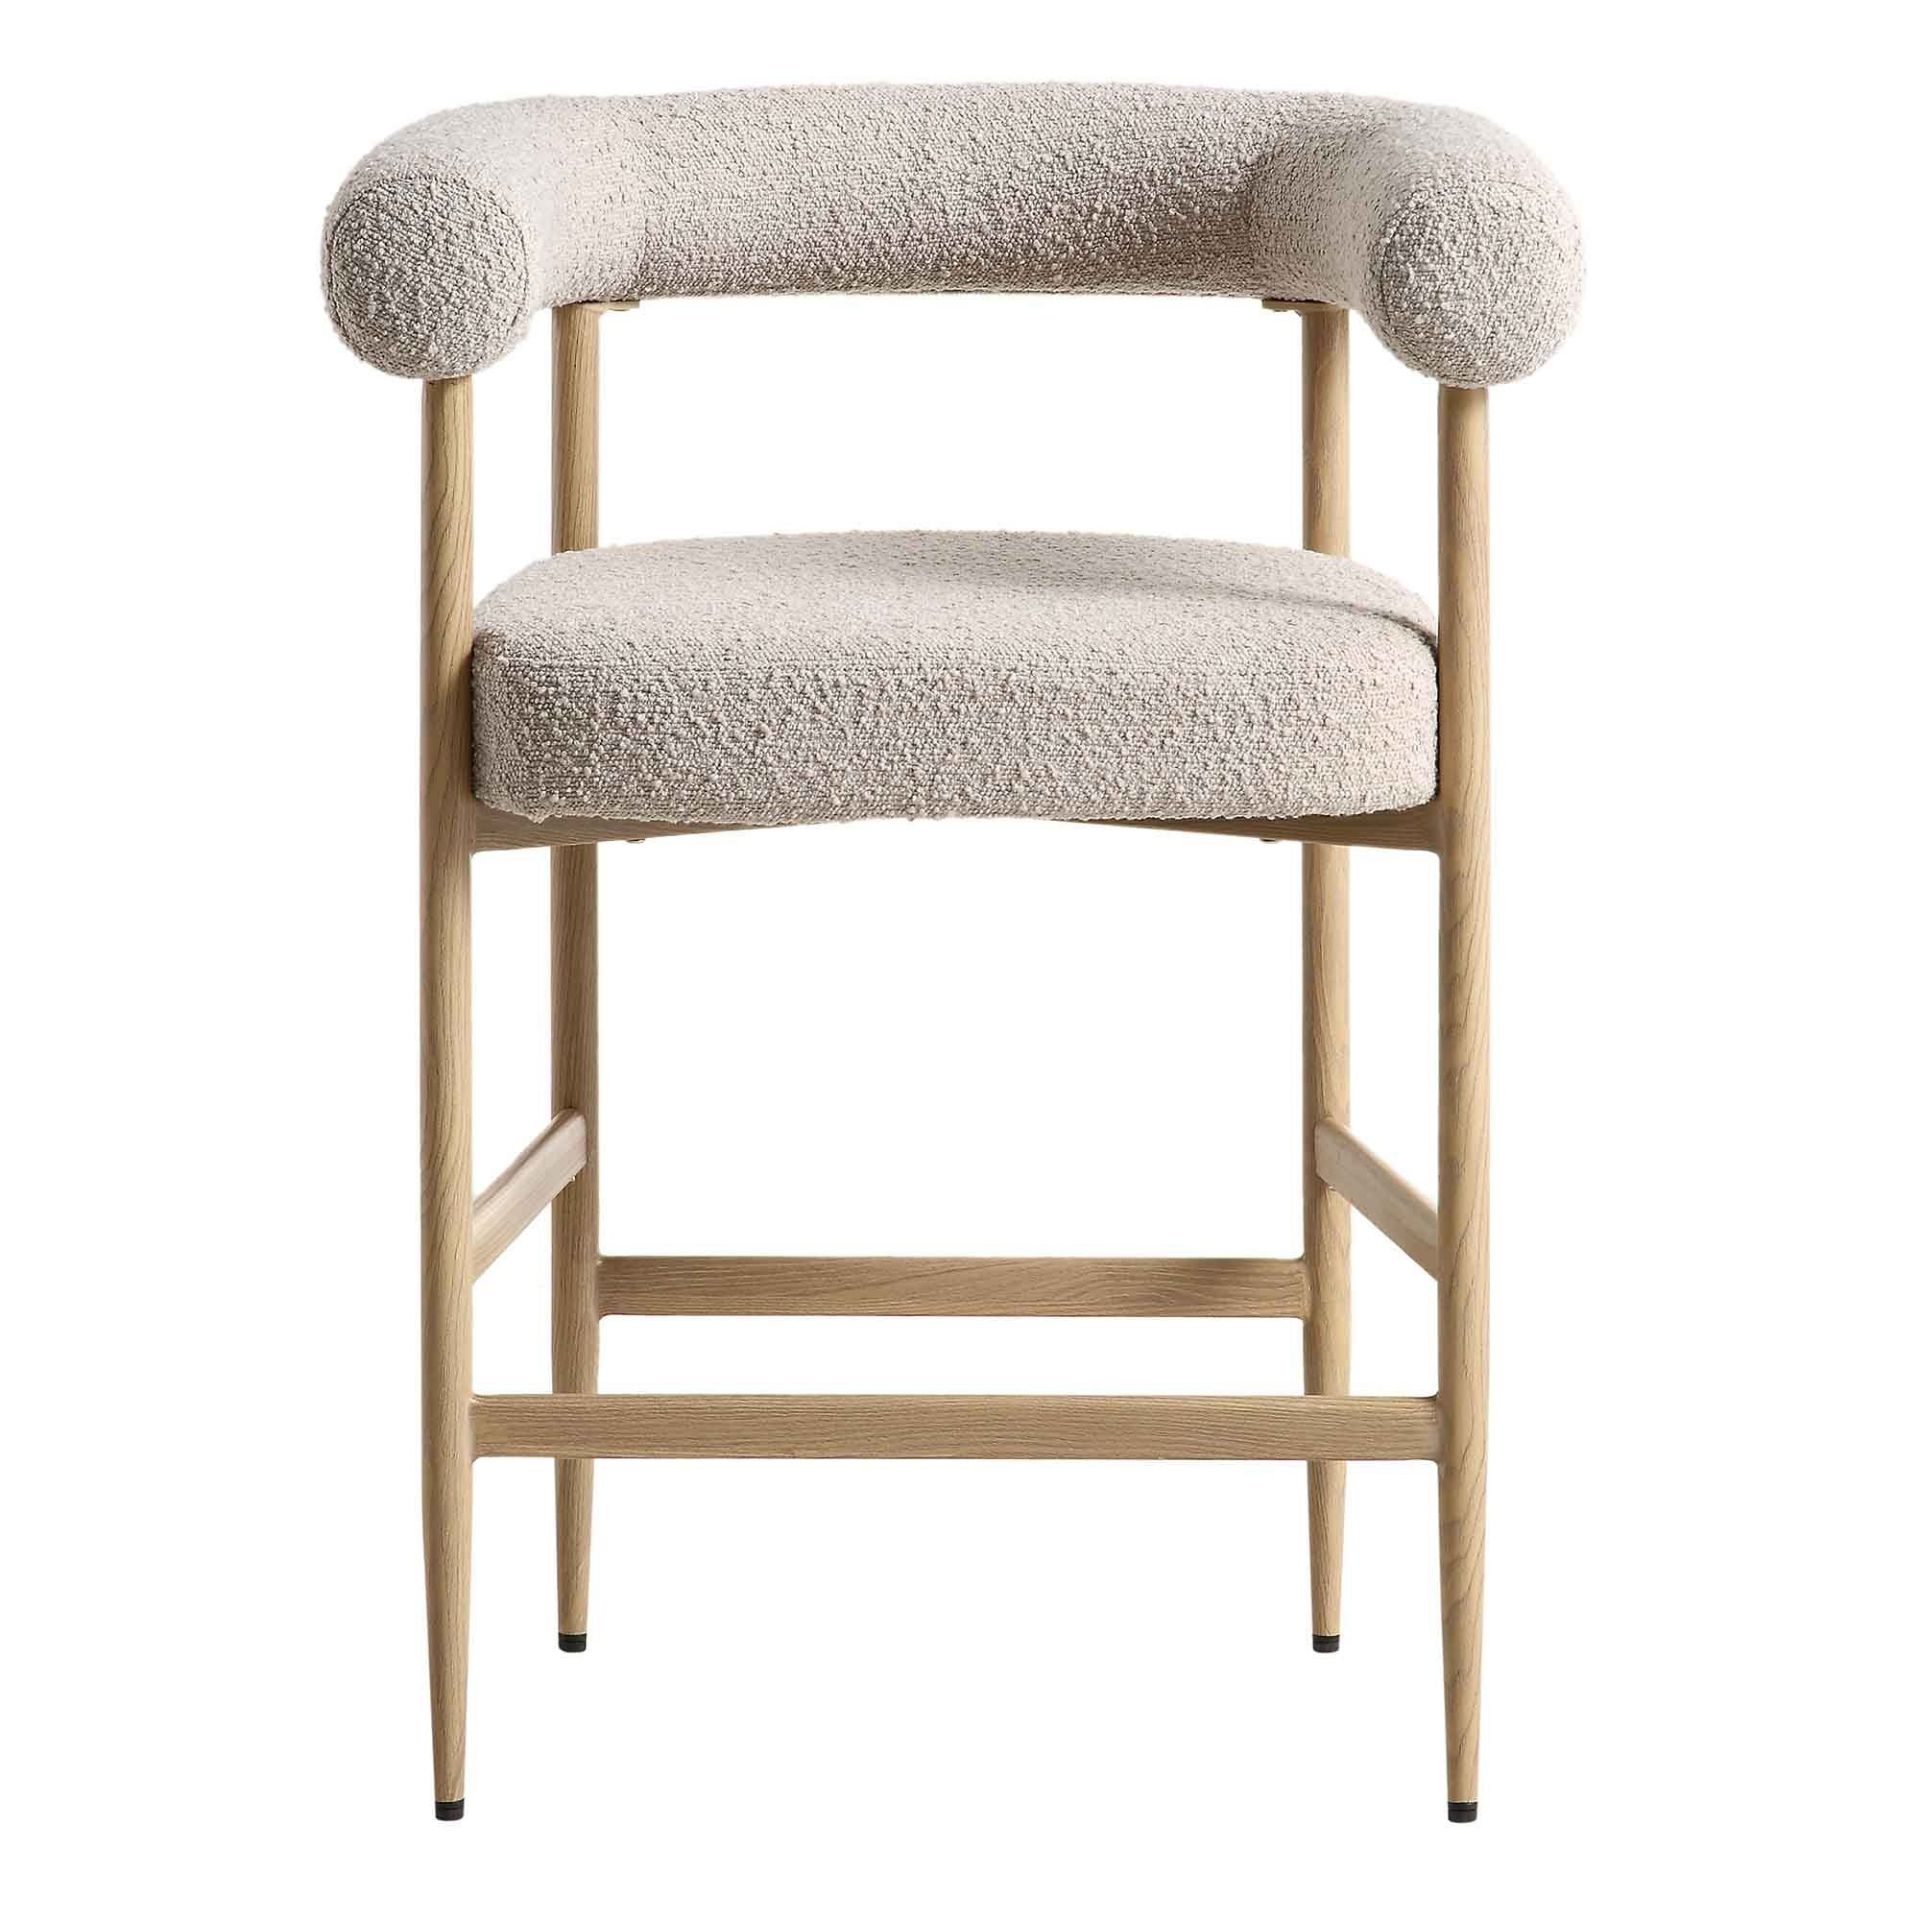 Fulbourn Taupe Boucle Counter Stool with Natural Wood Effect Legs. - ER29. RRP £199.99. A cheerful - Image 2 of 4